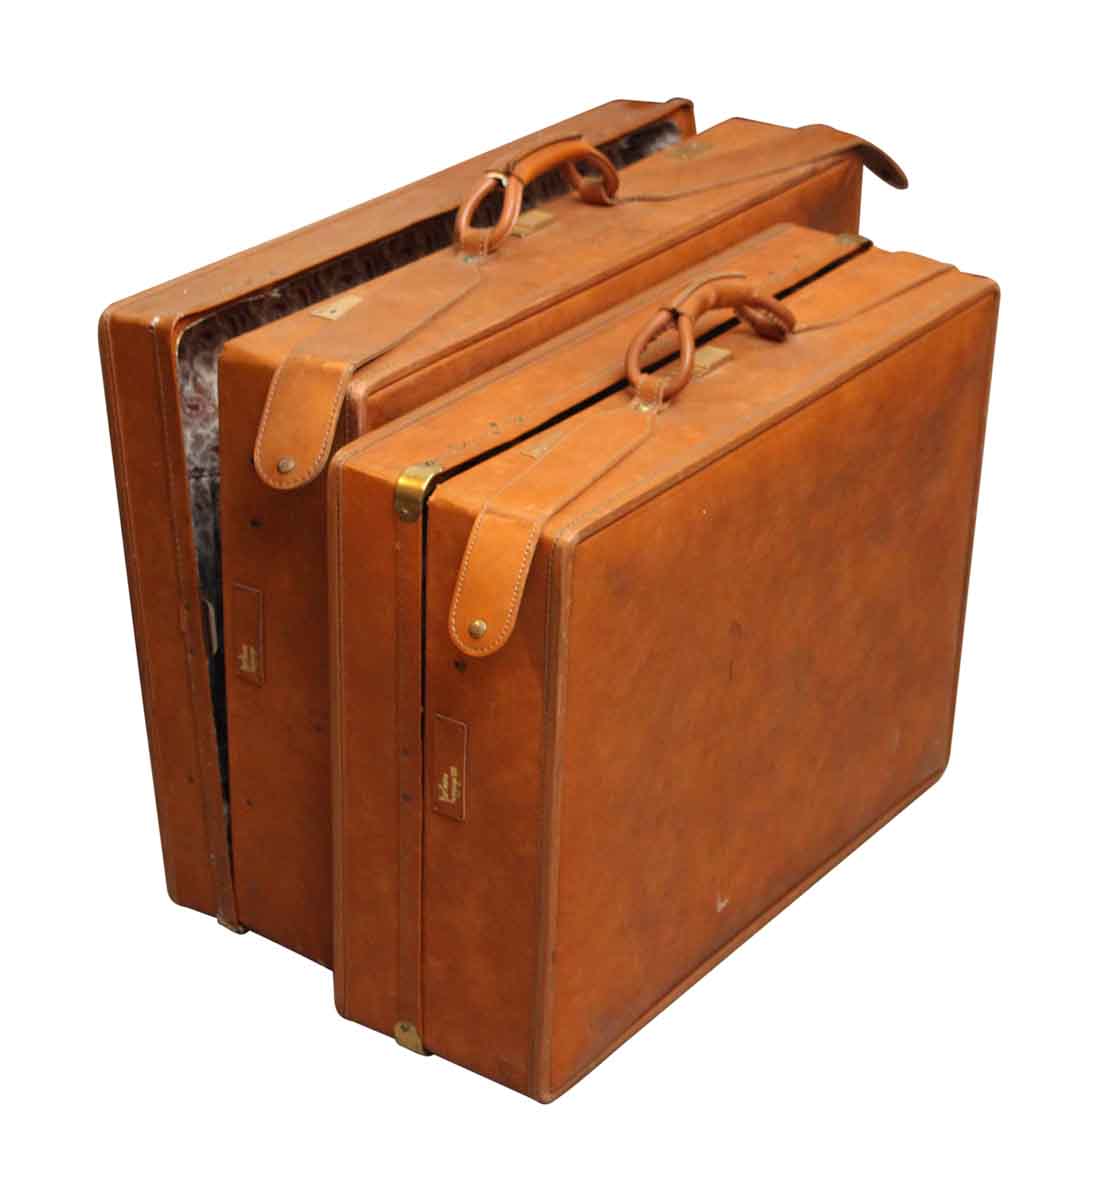 Vintage American Leather Briefcase by Hartmann, 1920 for sale at